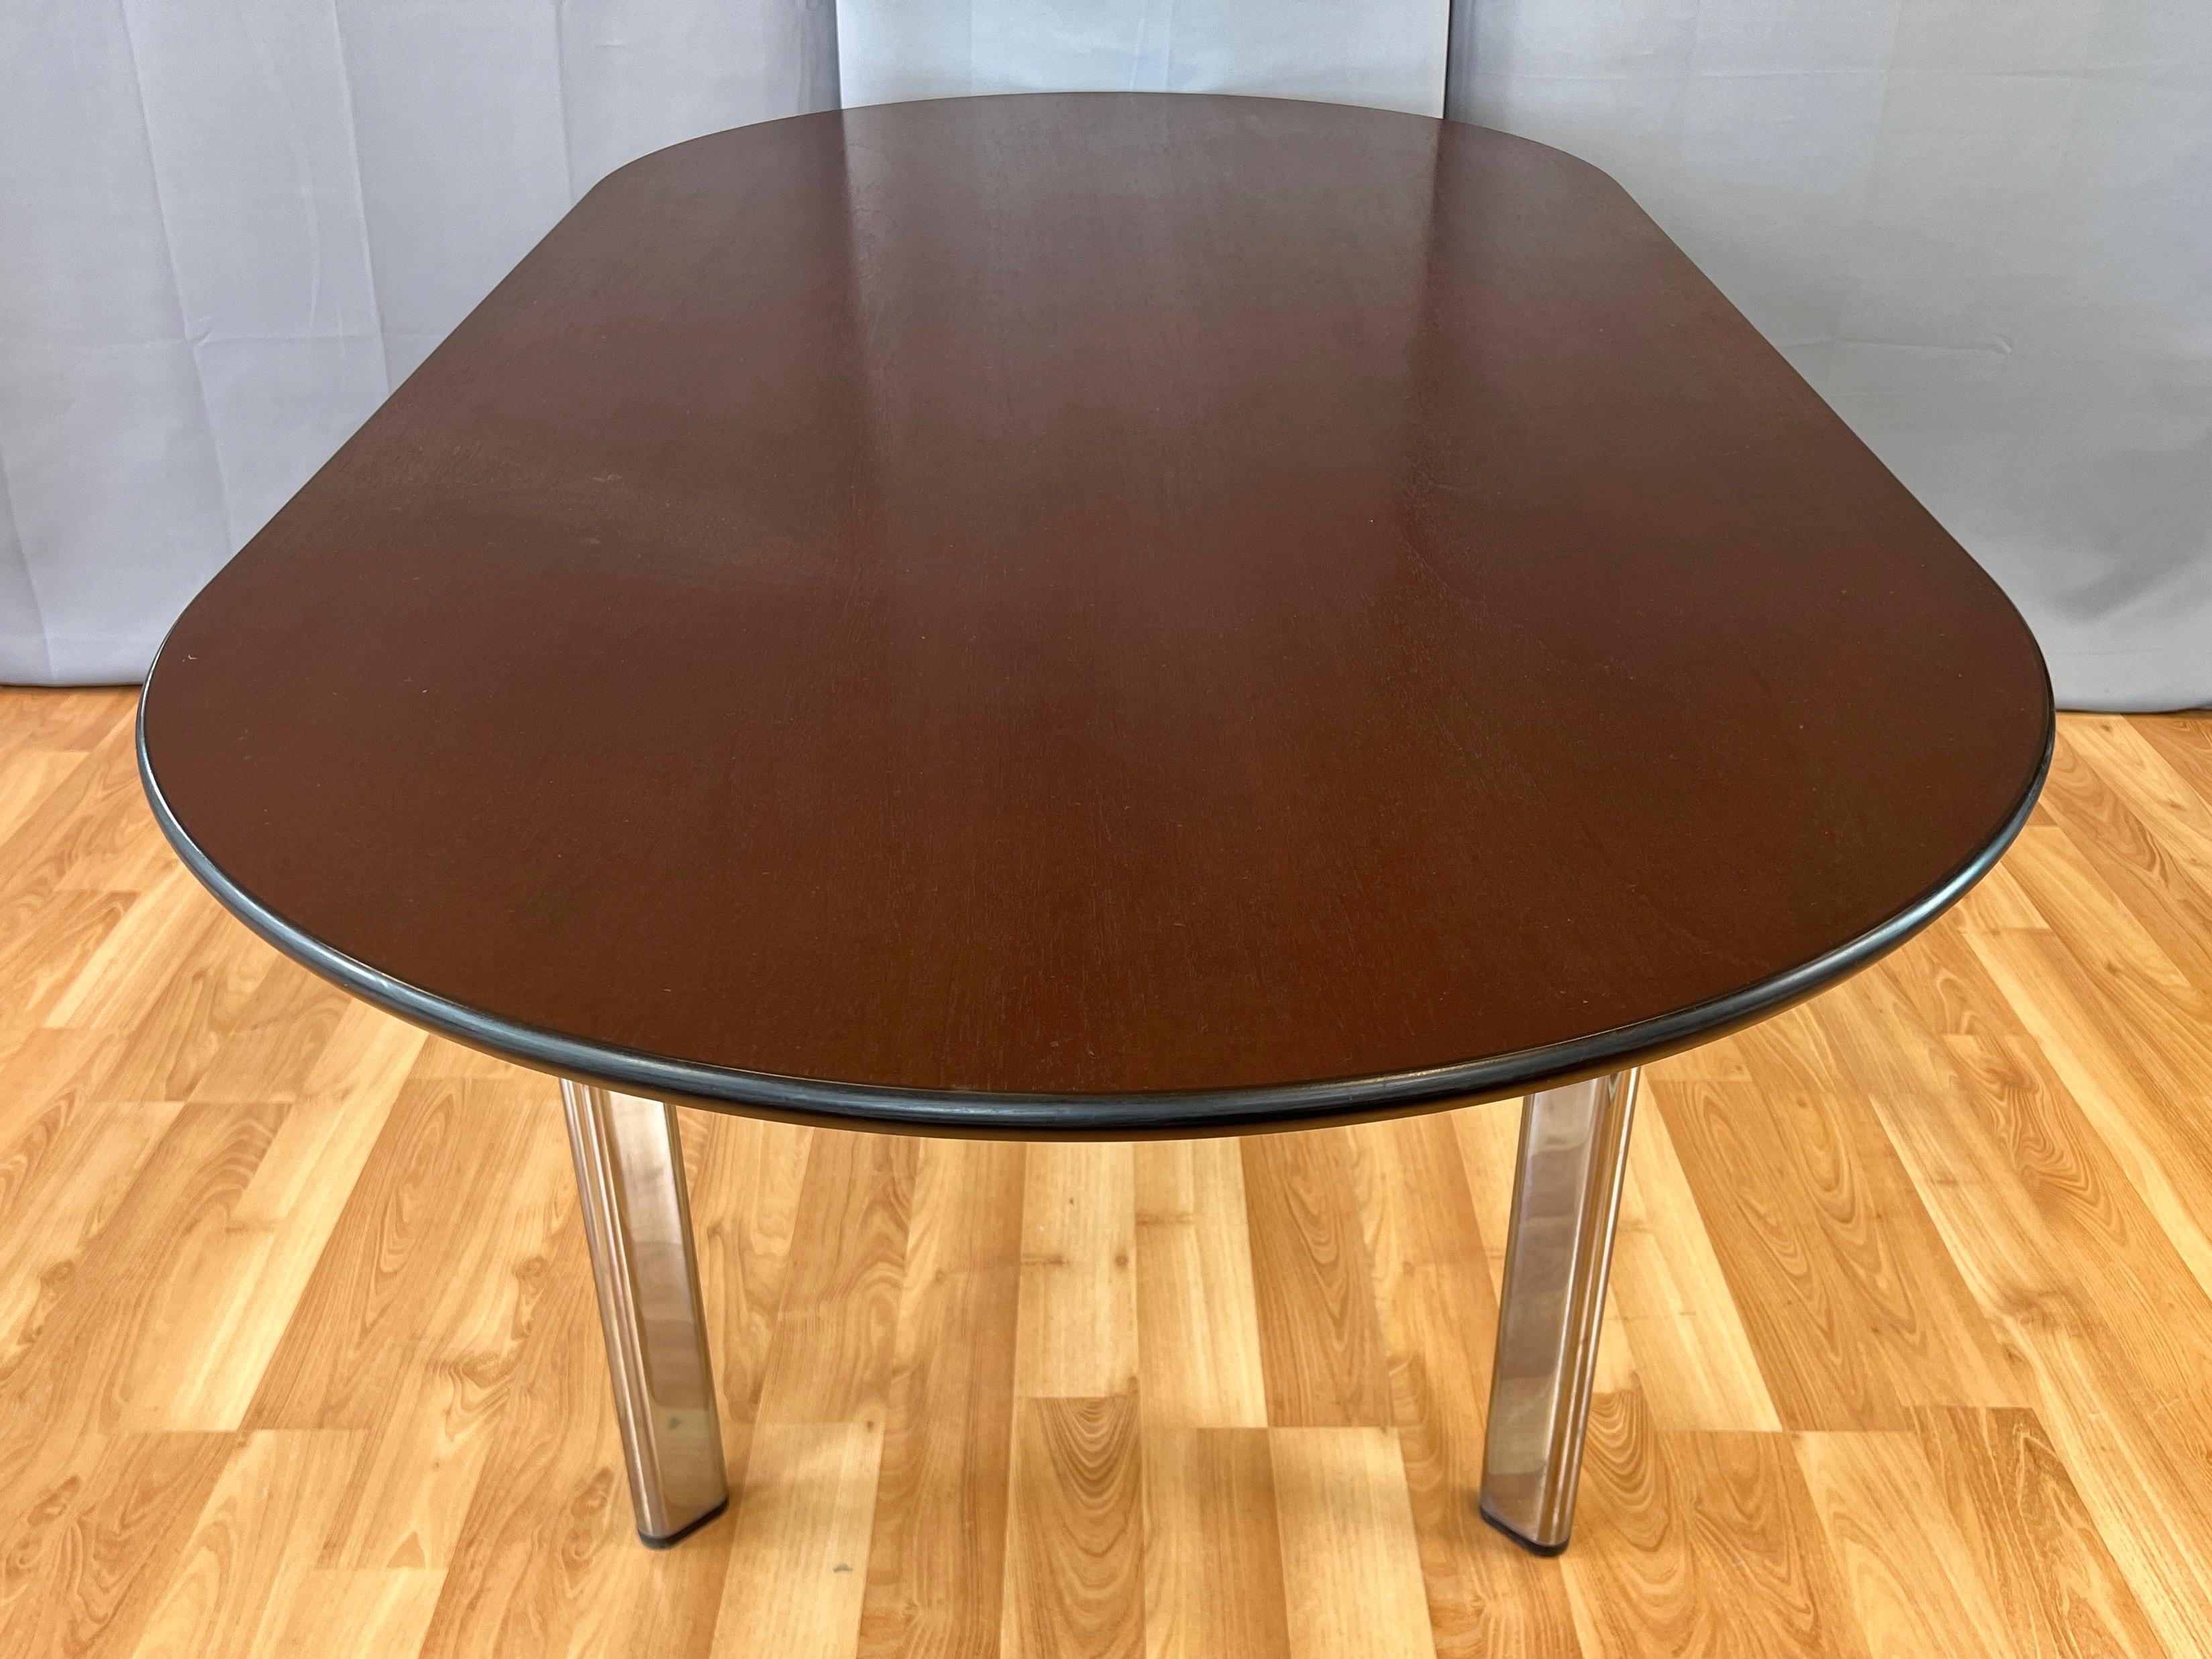 Metal Joseph D’Urso for Knoll High Table in American Cherry and Chrome, 1995 For Sale